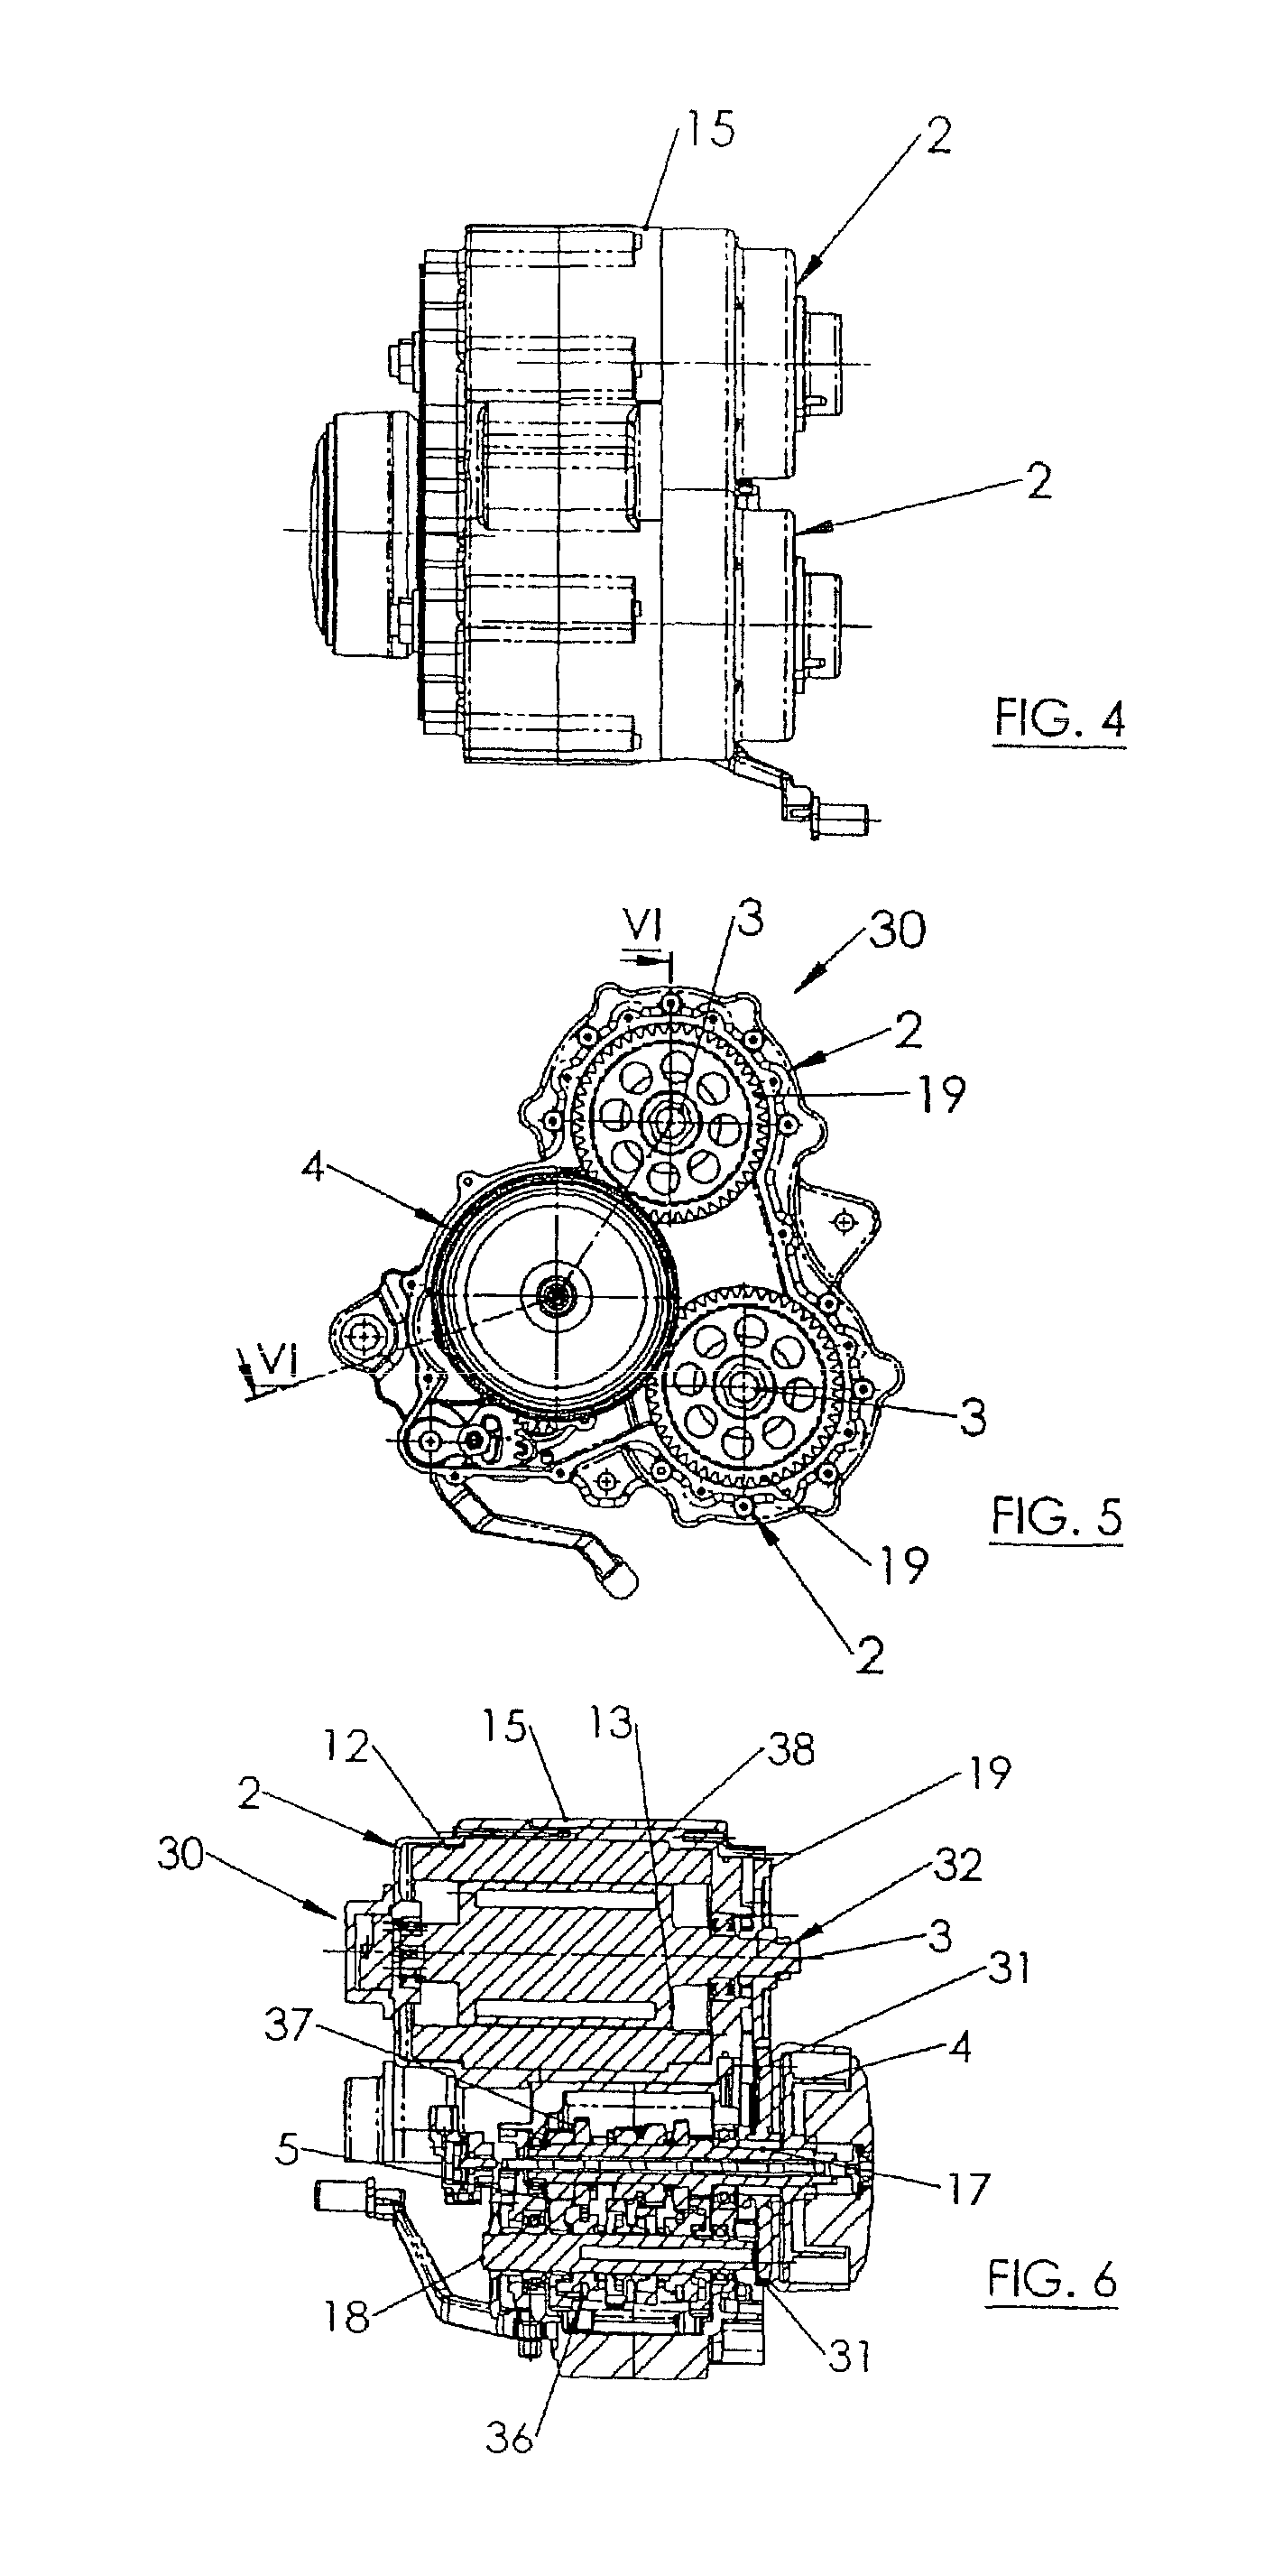 Propulsion system for a self-propelled vehicle with multiple electric drive units